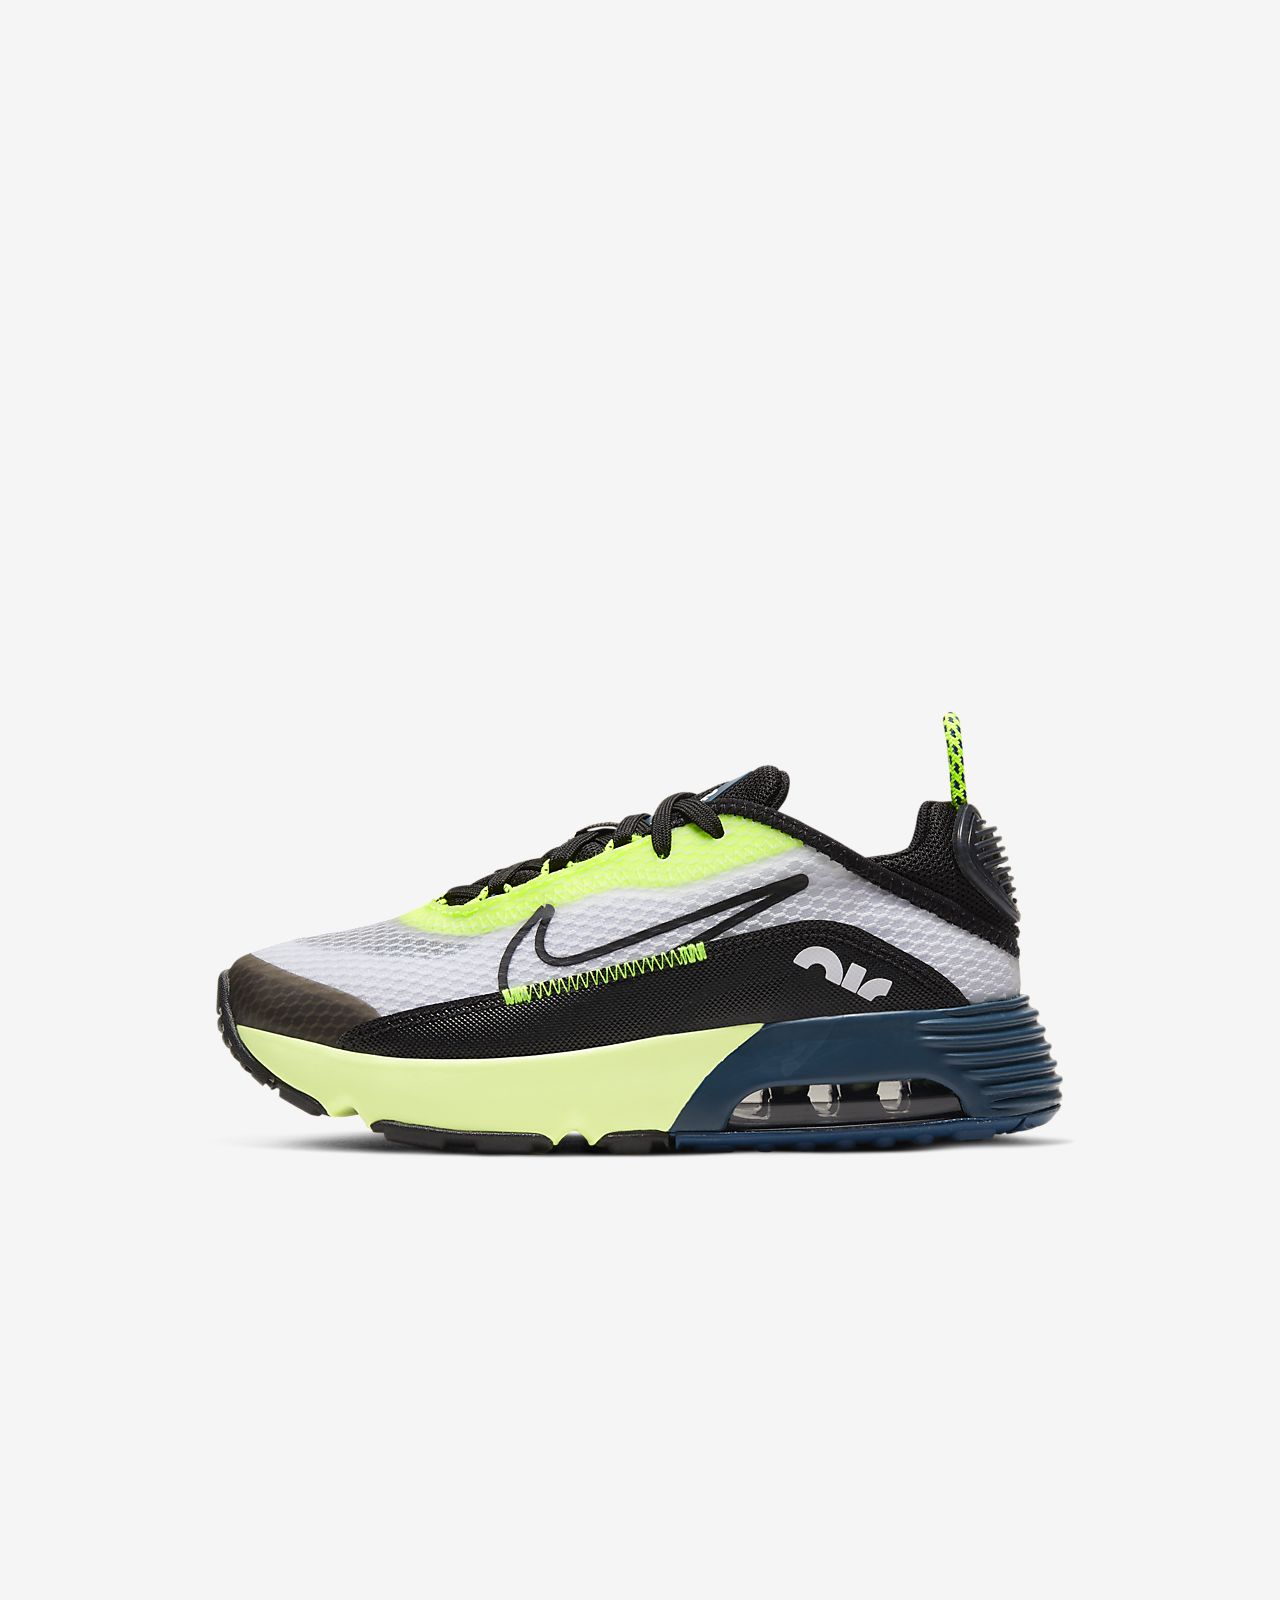 nike air max younger kids Shop Clothing 